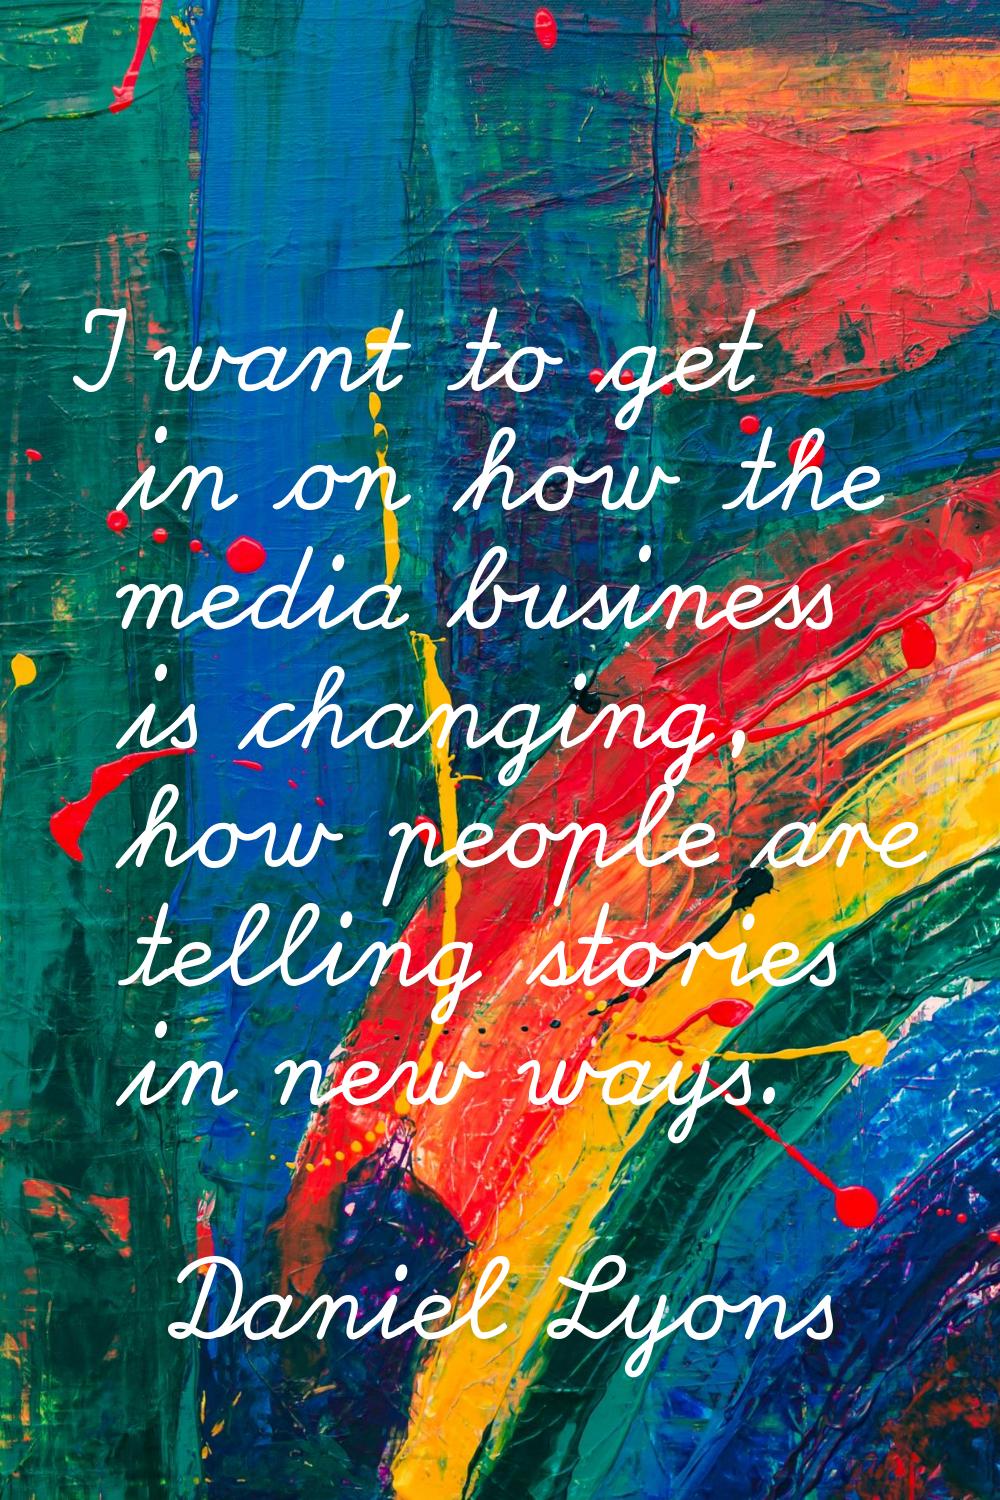 I want to get in on how the media business is changing, how people are telling stories in new ways.